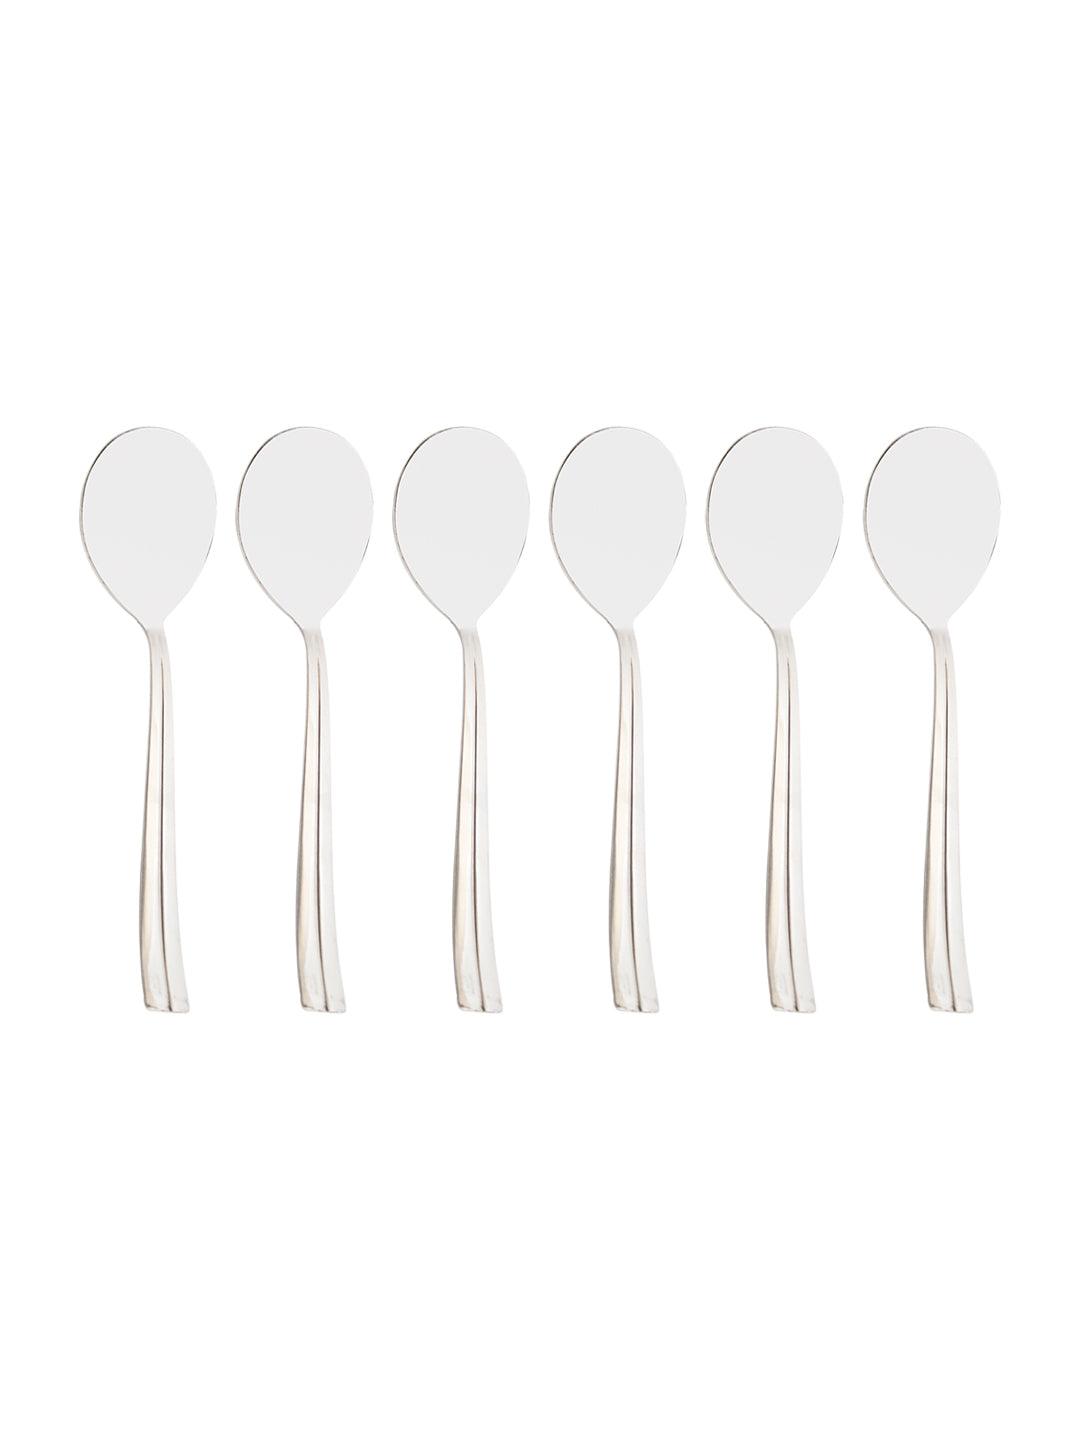 Midline Steel Tableware Cutlery Set Of 18 Pcs With Stand in Silver Colour - MARKET 99